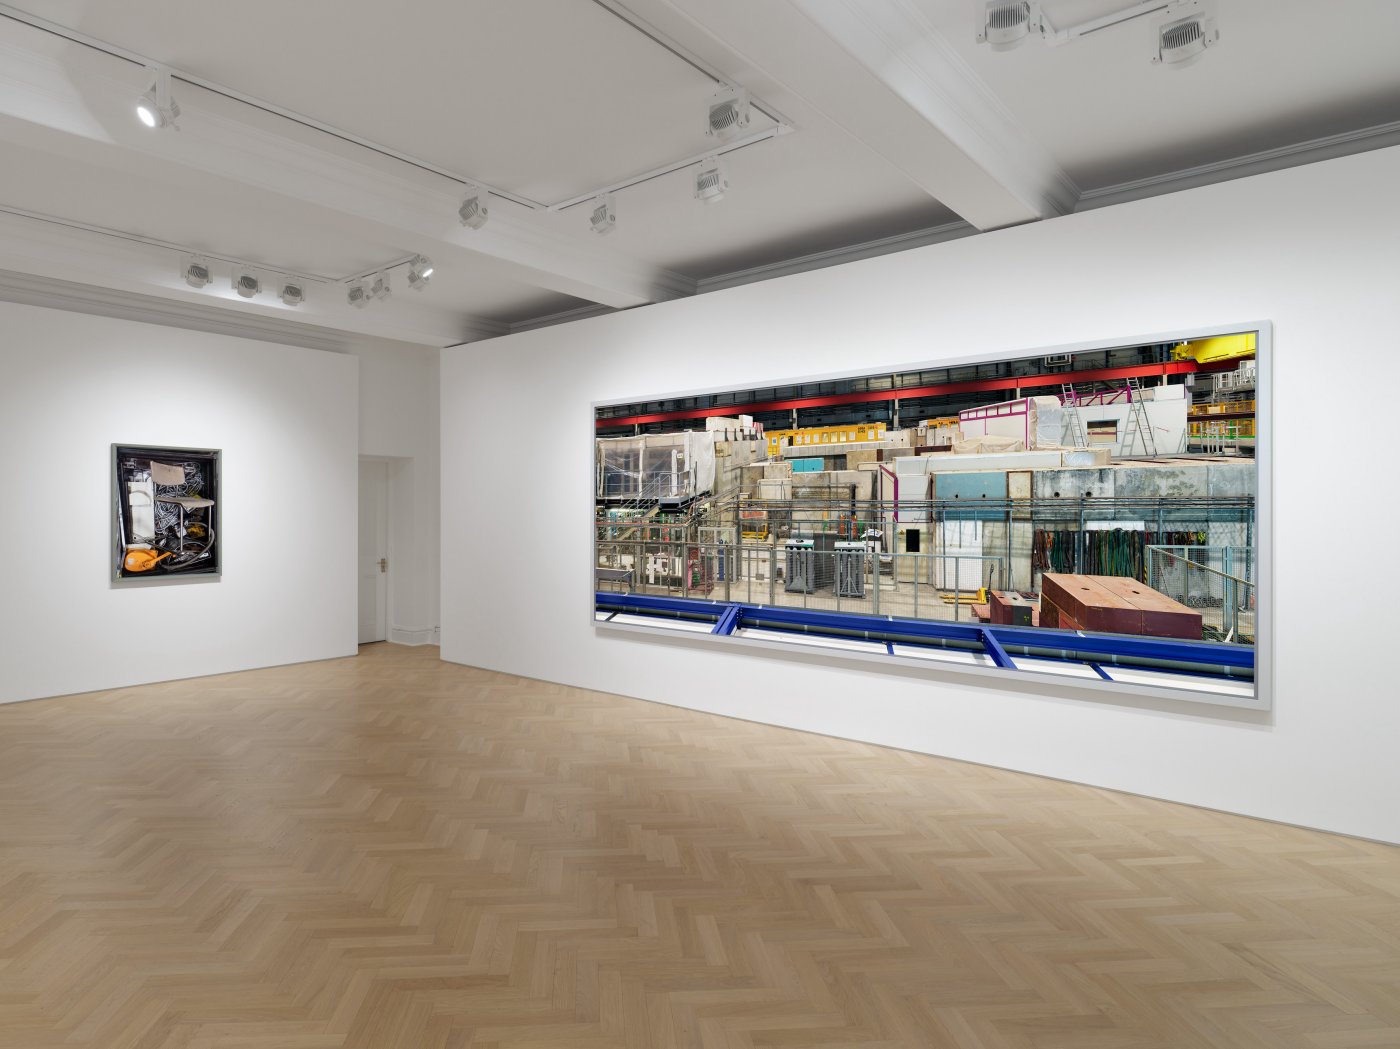 Installation image for Thomas Struth, at Galerie Max Hetzler